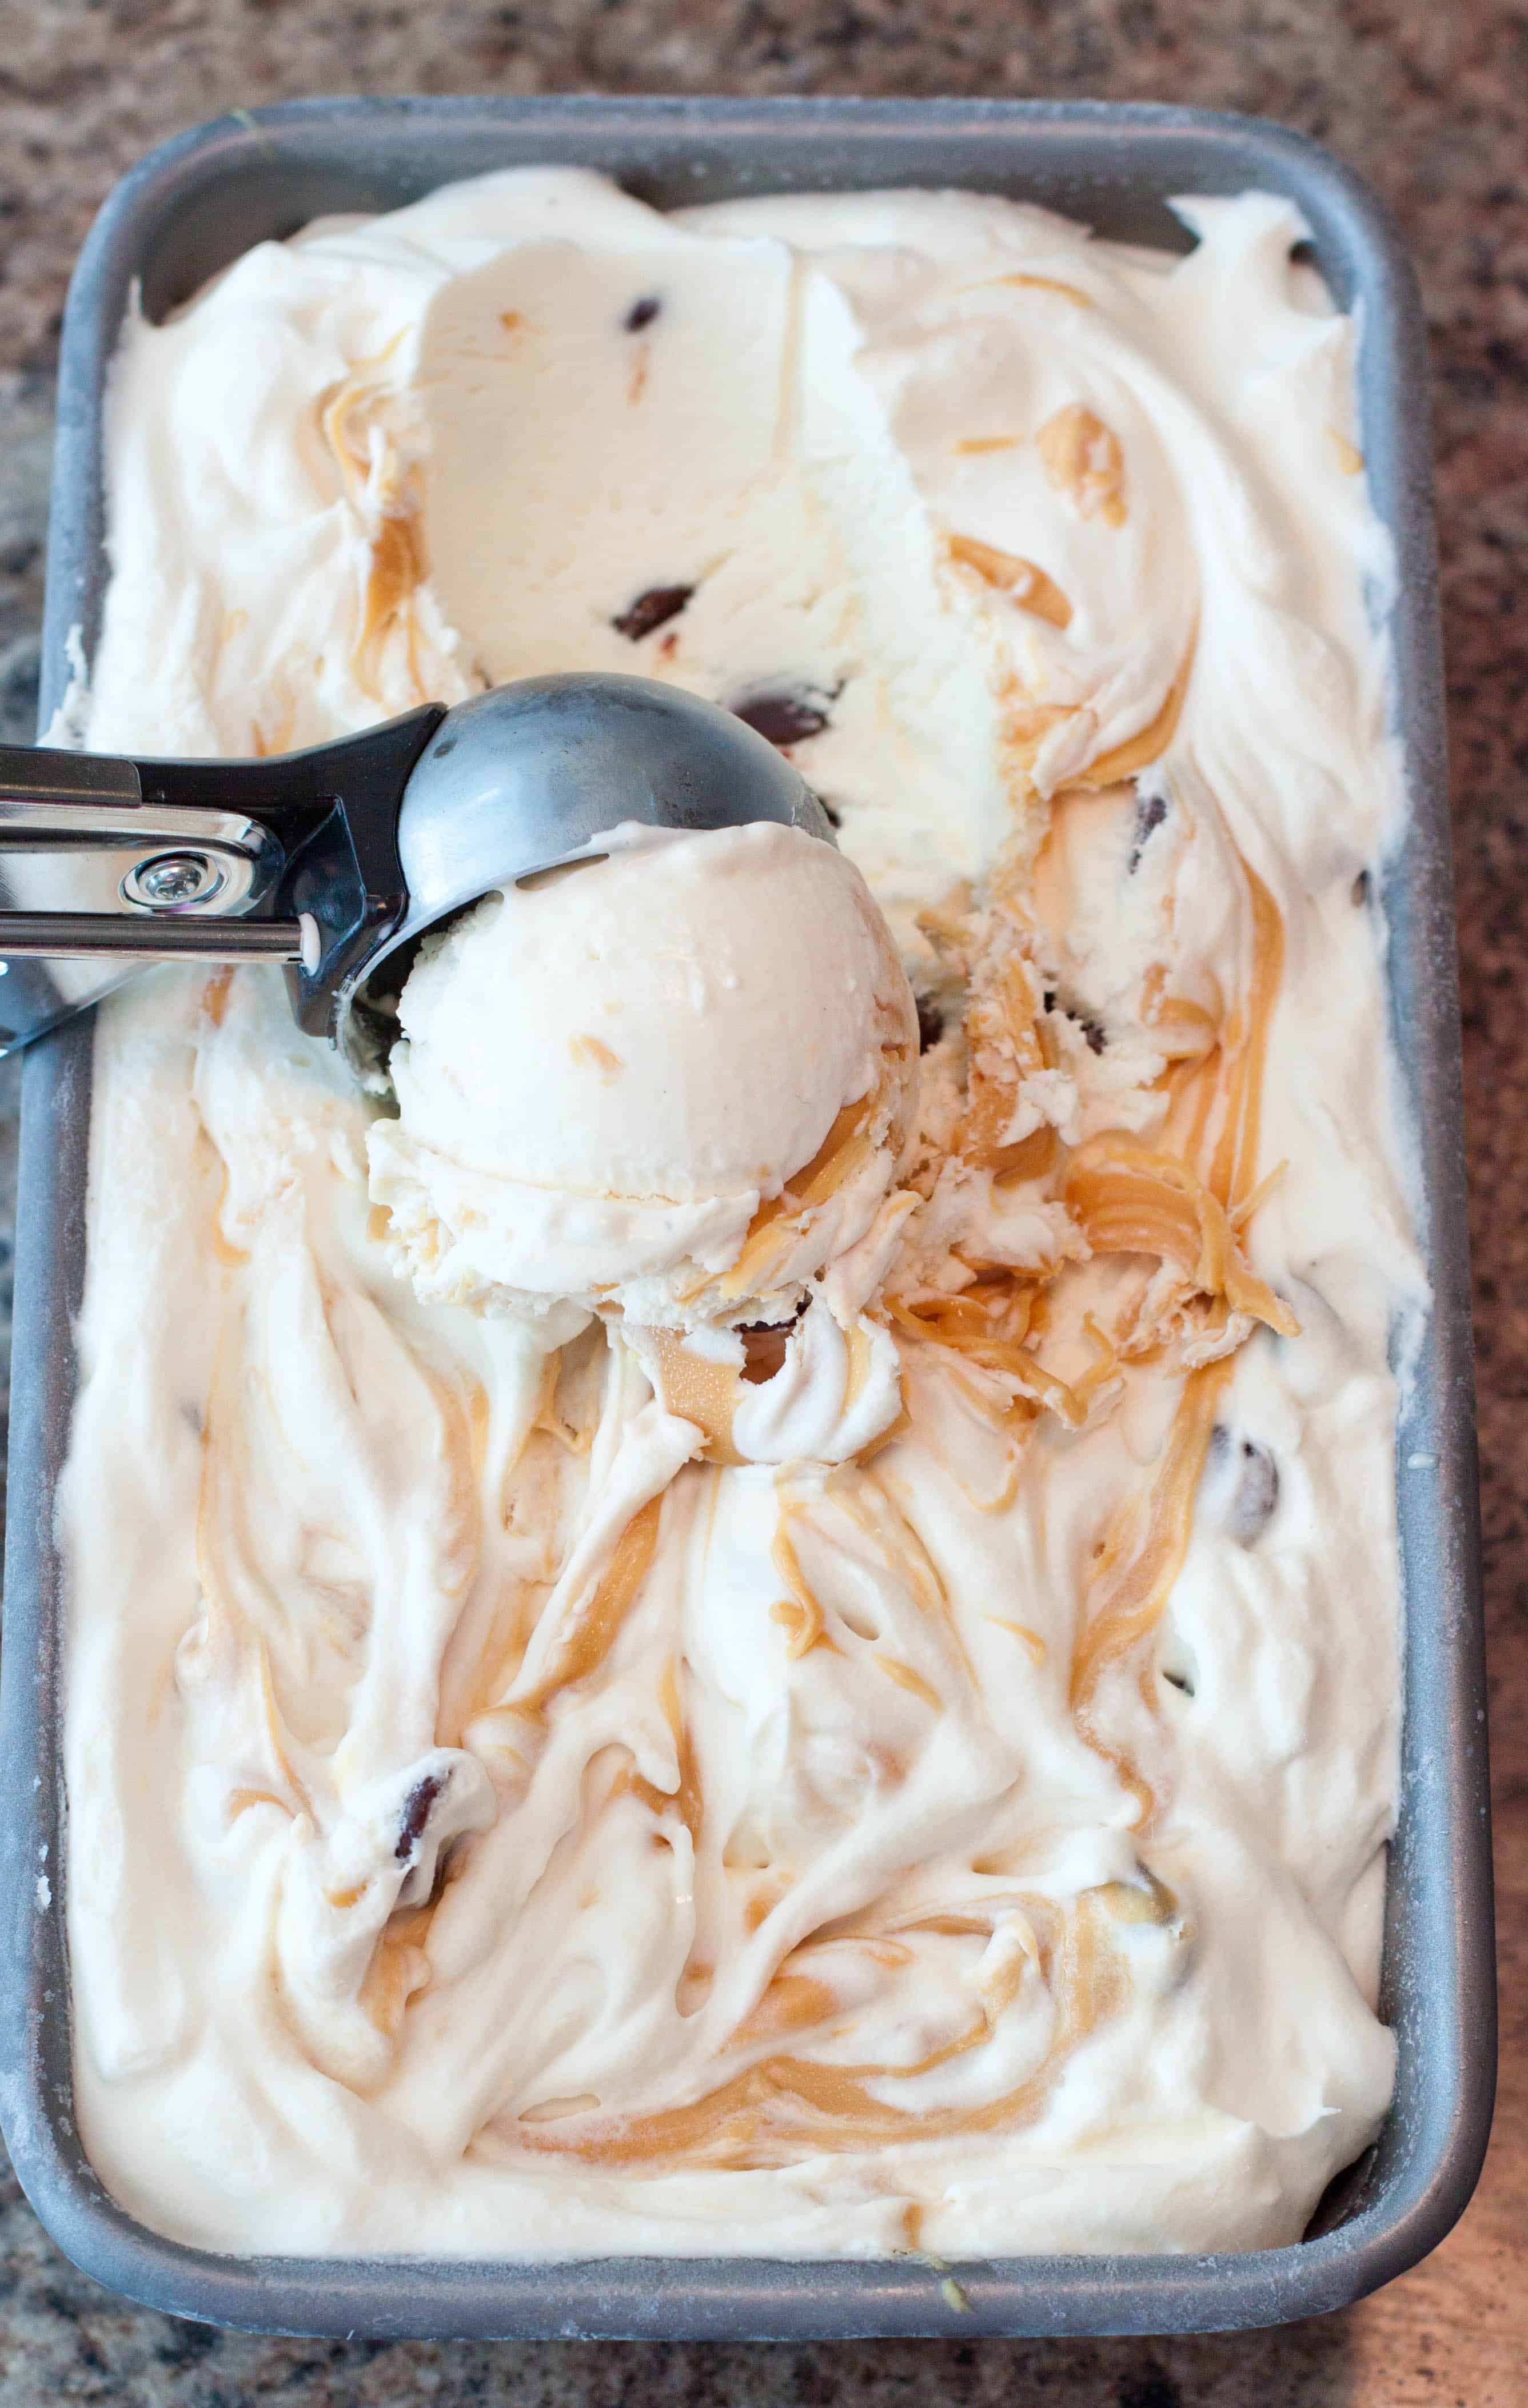 A rich, creamy, and EASY No Churn Caramelized White Chocolate and Chocolate Chip Ice Cream!